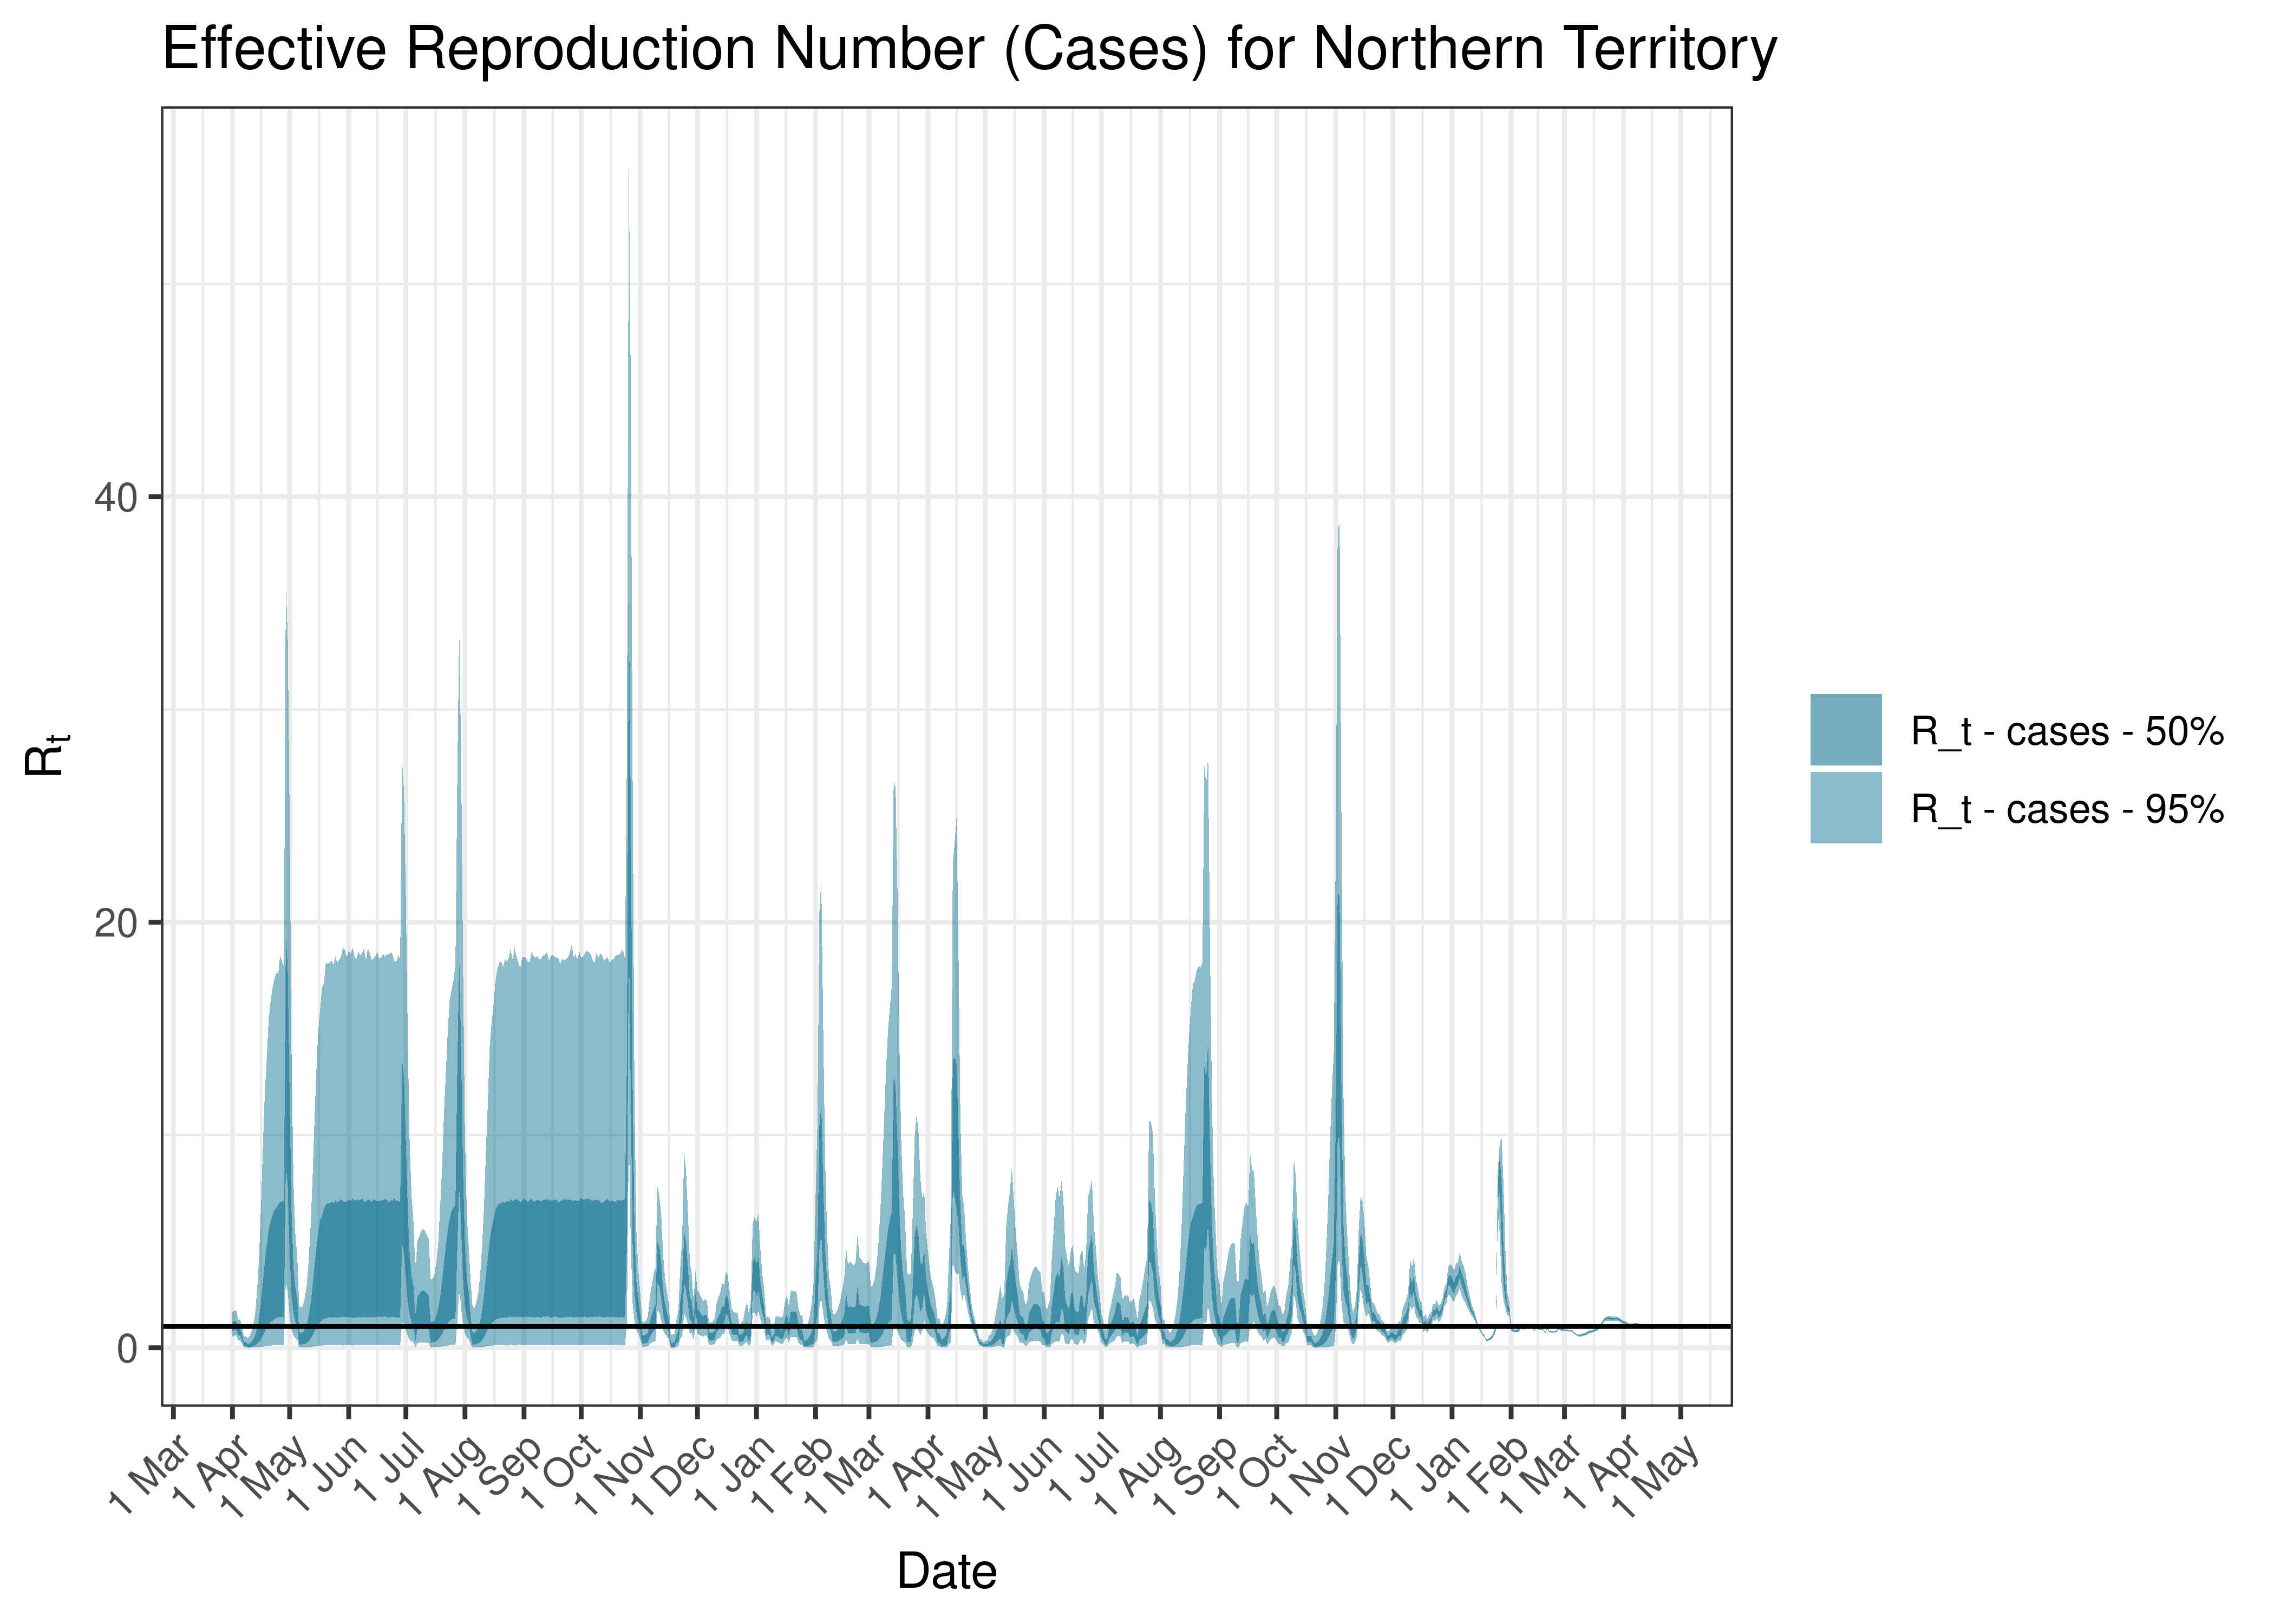 Estimated Effective Reproduction Number Based on Cases for Northern Territory since 1 April 2020